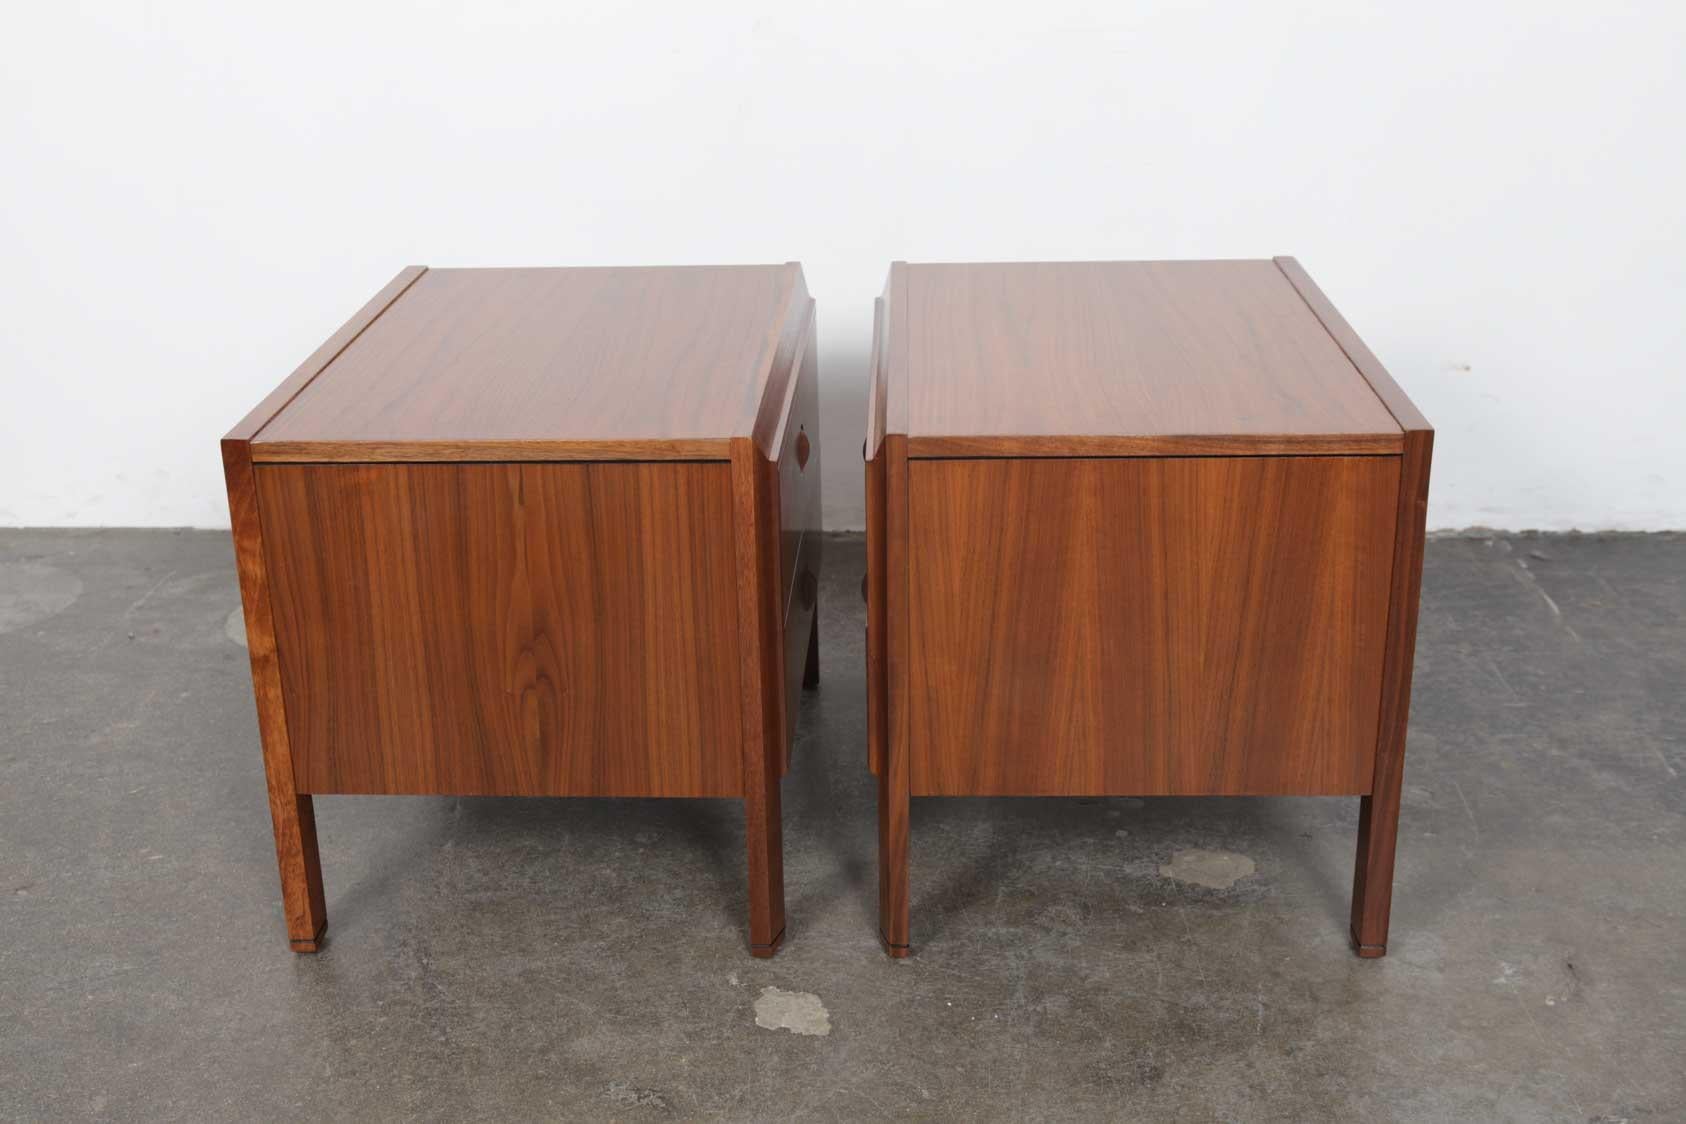 Pair of two-drawer walnut end tables by Milo Baughman for renowned American manufacturer Glenn of California, recently been refinished in a satin lacquer finish.